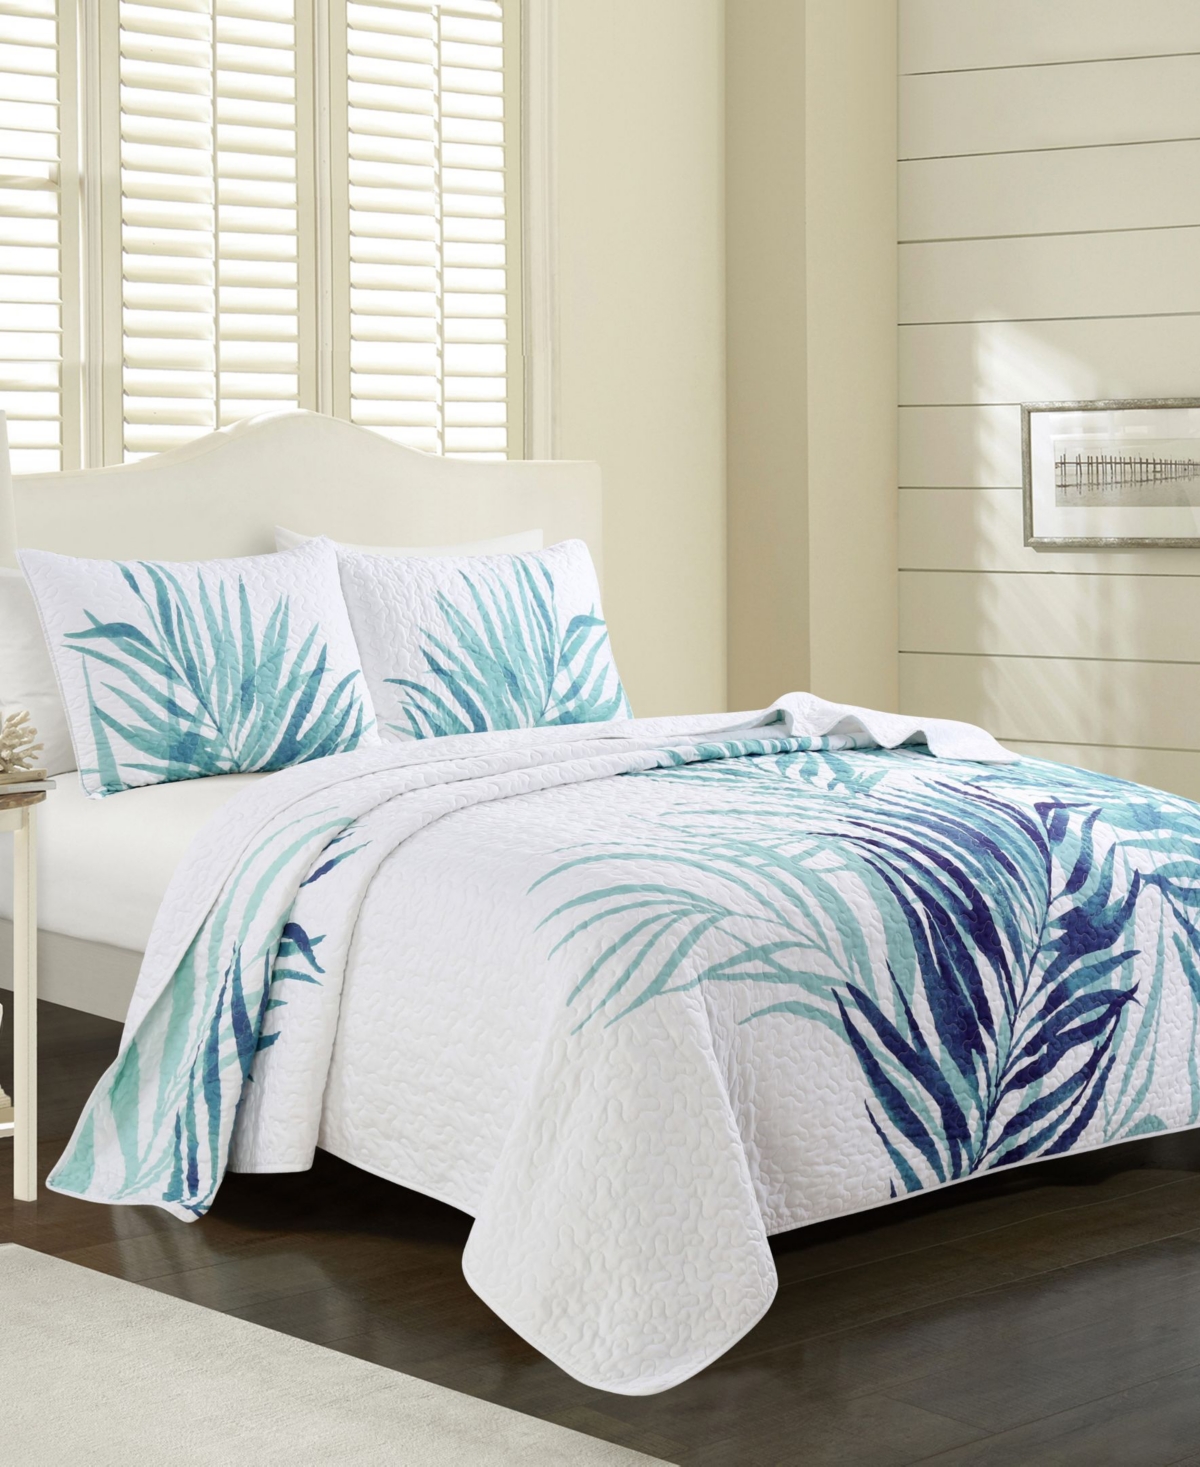 Elise And James Home Palm Leaf Tropical Jungle 2-piece Quilt Set, Twin In Teal